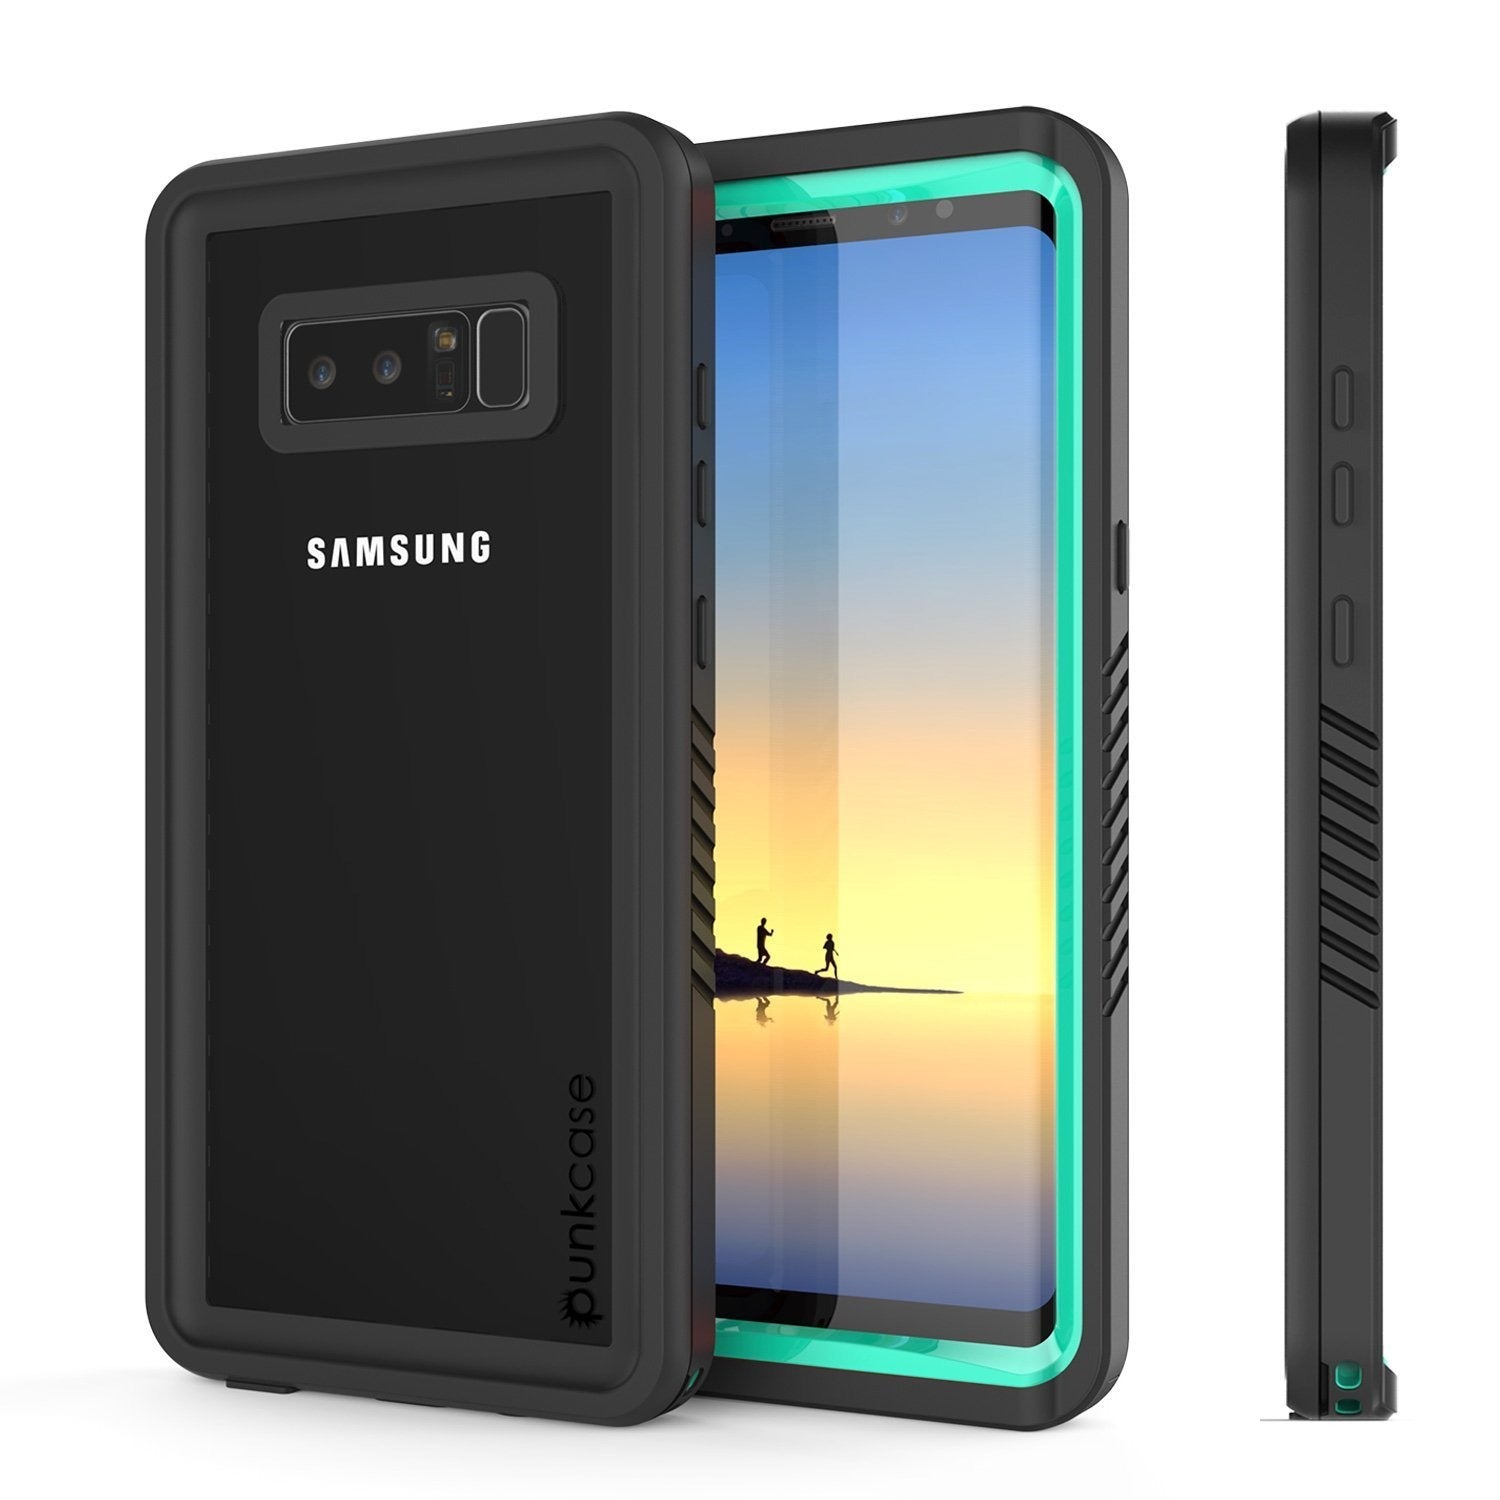 Galaxy Note 8 Waterproof Case, Punkcase [Extreme Series] [Teal]